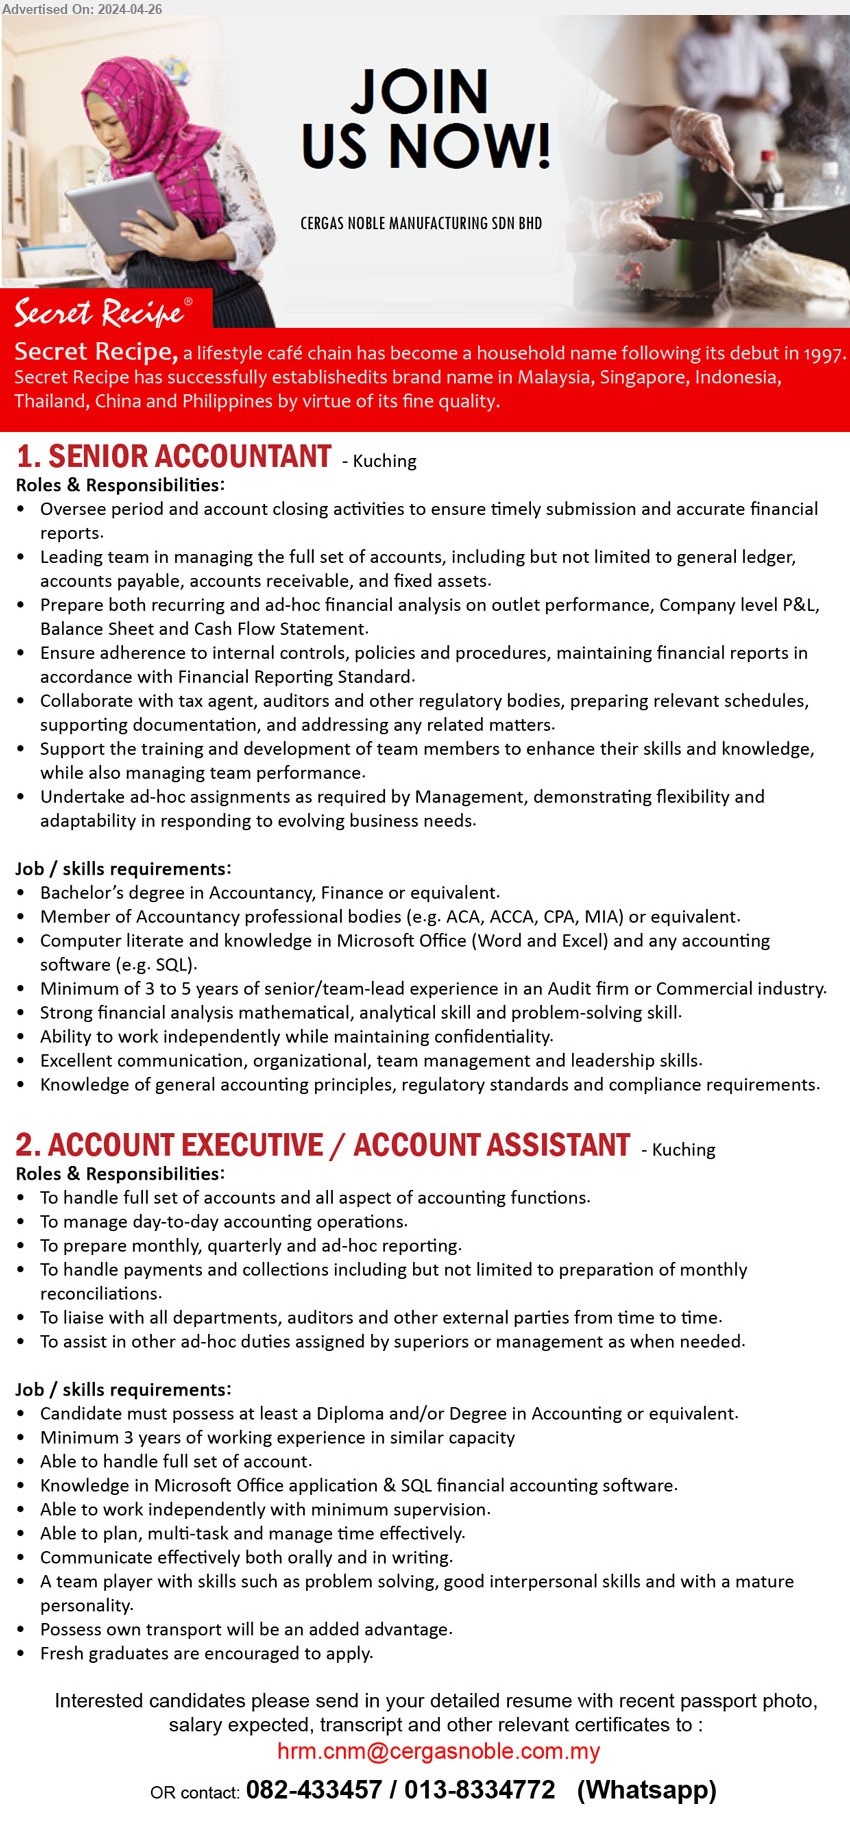 CERGAS NOBLE MANUFACTURING SDN BHD - 1. SENIOR ACCOUNTANT (Kuching), Bachelor’s degree in Accountancy, Finance, Member of Accountancy professional bodies (e.g. ACA, ACCA, CPA, MIA),...
2. ACCOUNT EXECUTIVE / ACCOUNT ASSISTANT (Kuching), Diploma and/or Degree in Accounting, 3 yrs. exp.,...
Whatsapp 082-433457 / 013-8334772 / Email resume to ...
